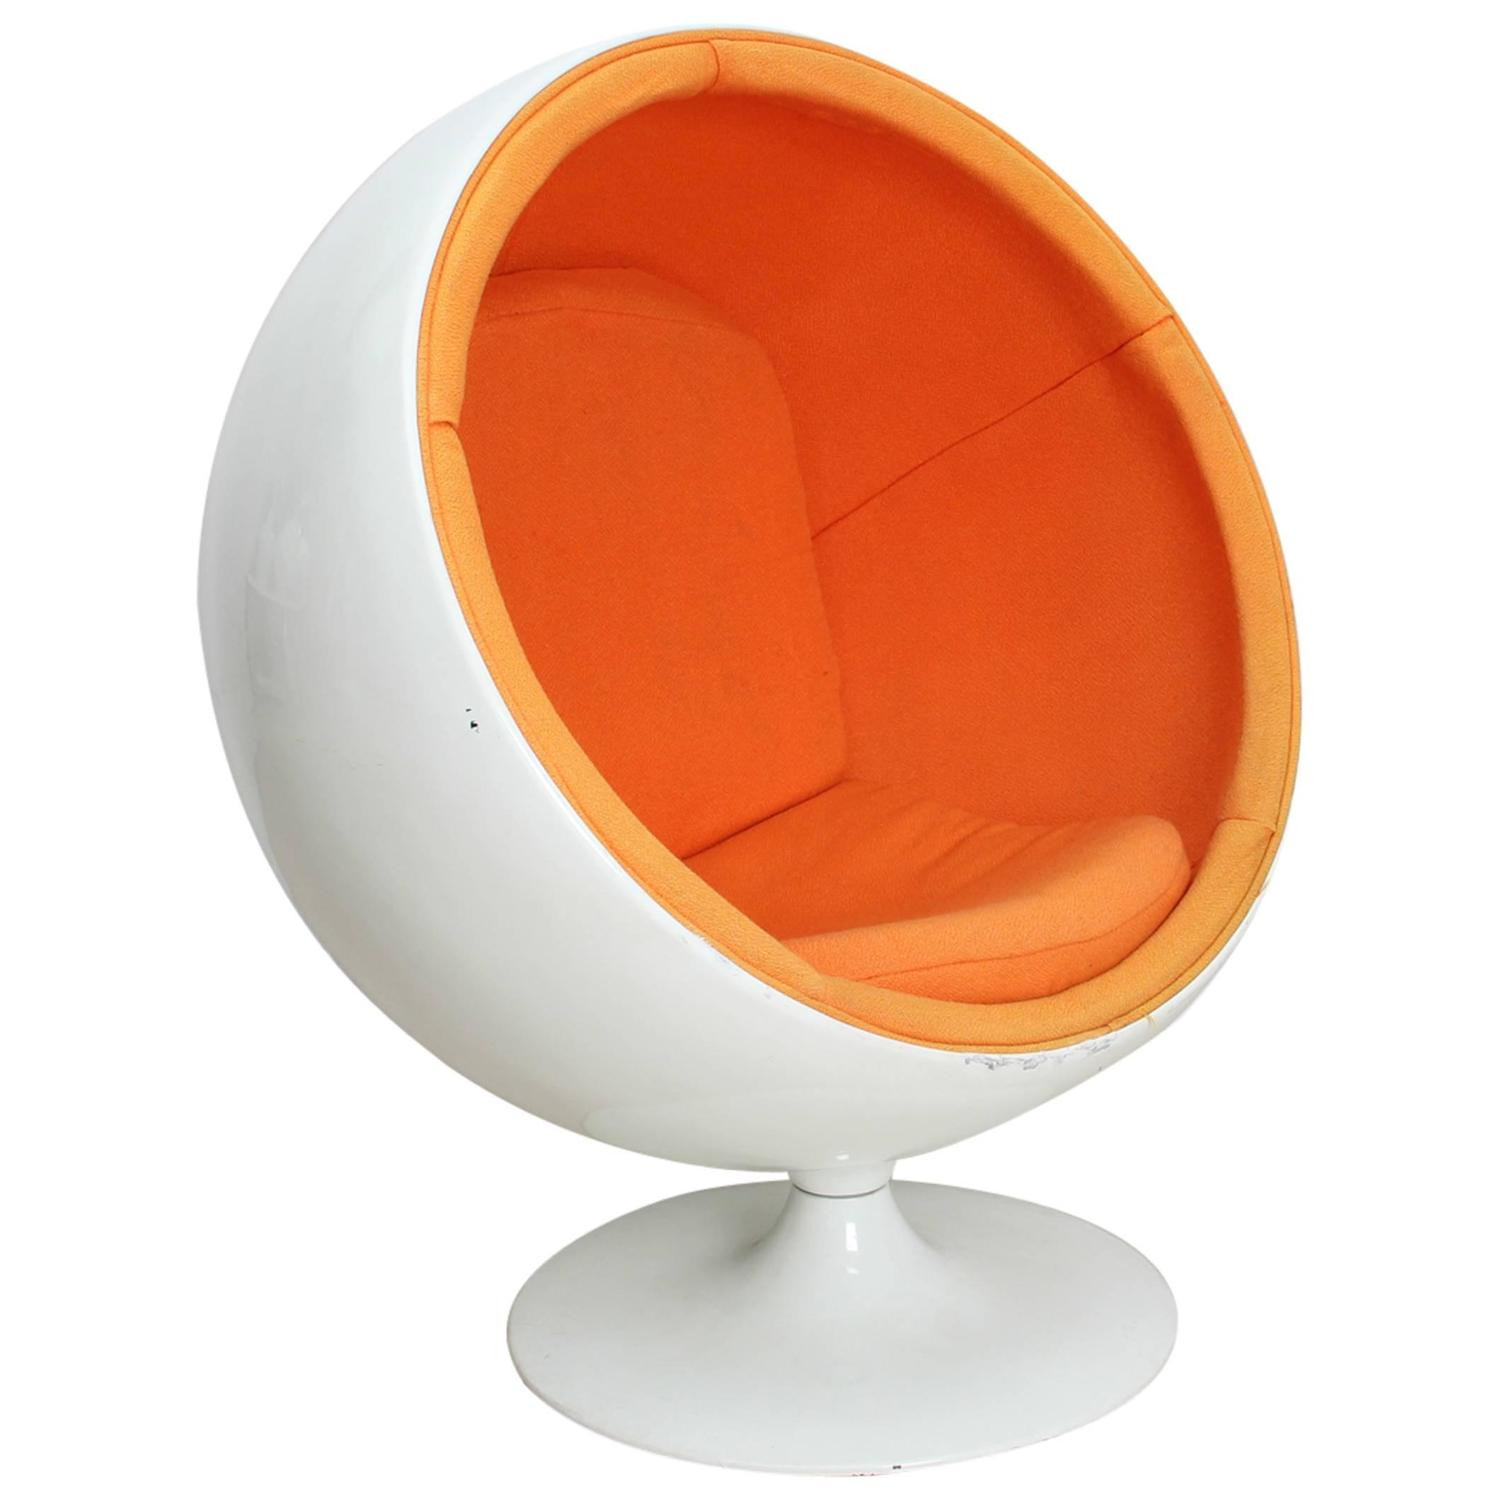 Kids Ball Chair
 Ball Chair for Kids by Eero Aarnio Ed Adelta 1963 For